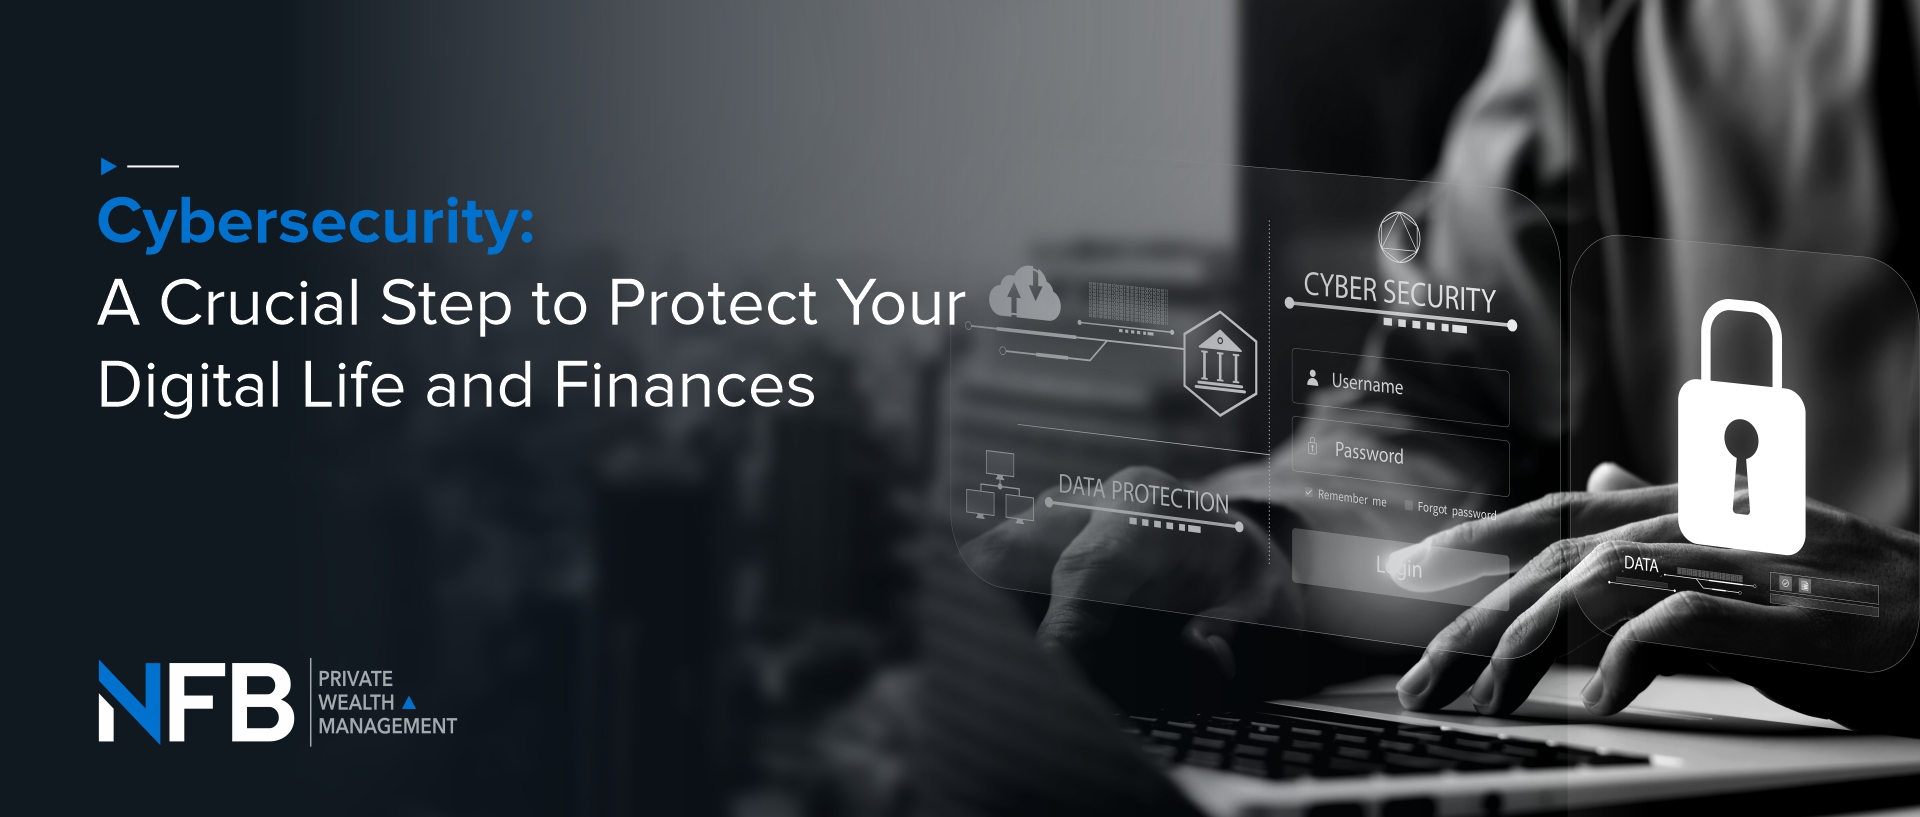 Cybersecurity: A crucial step to protect your digital life and finances